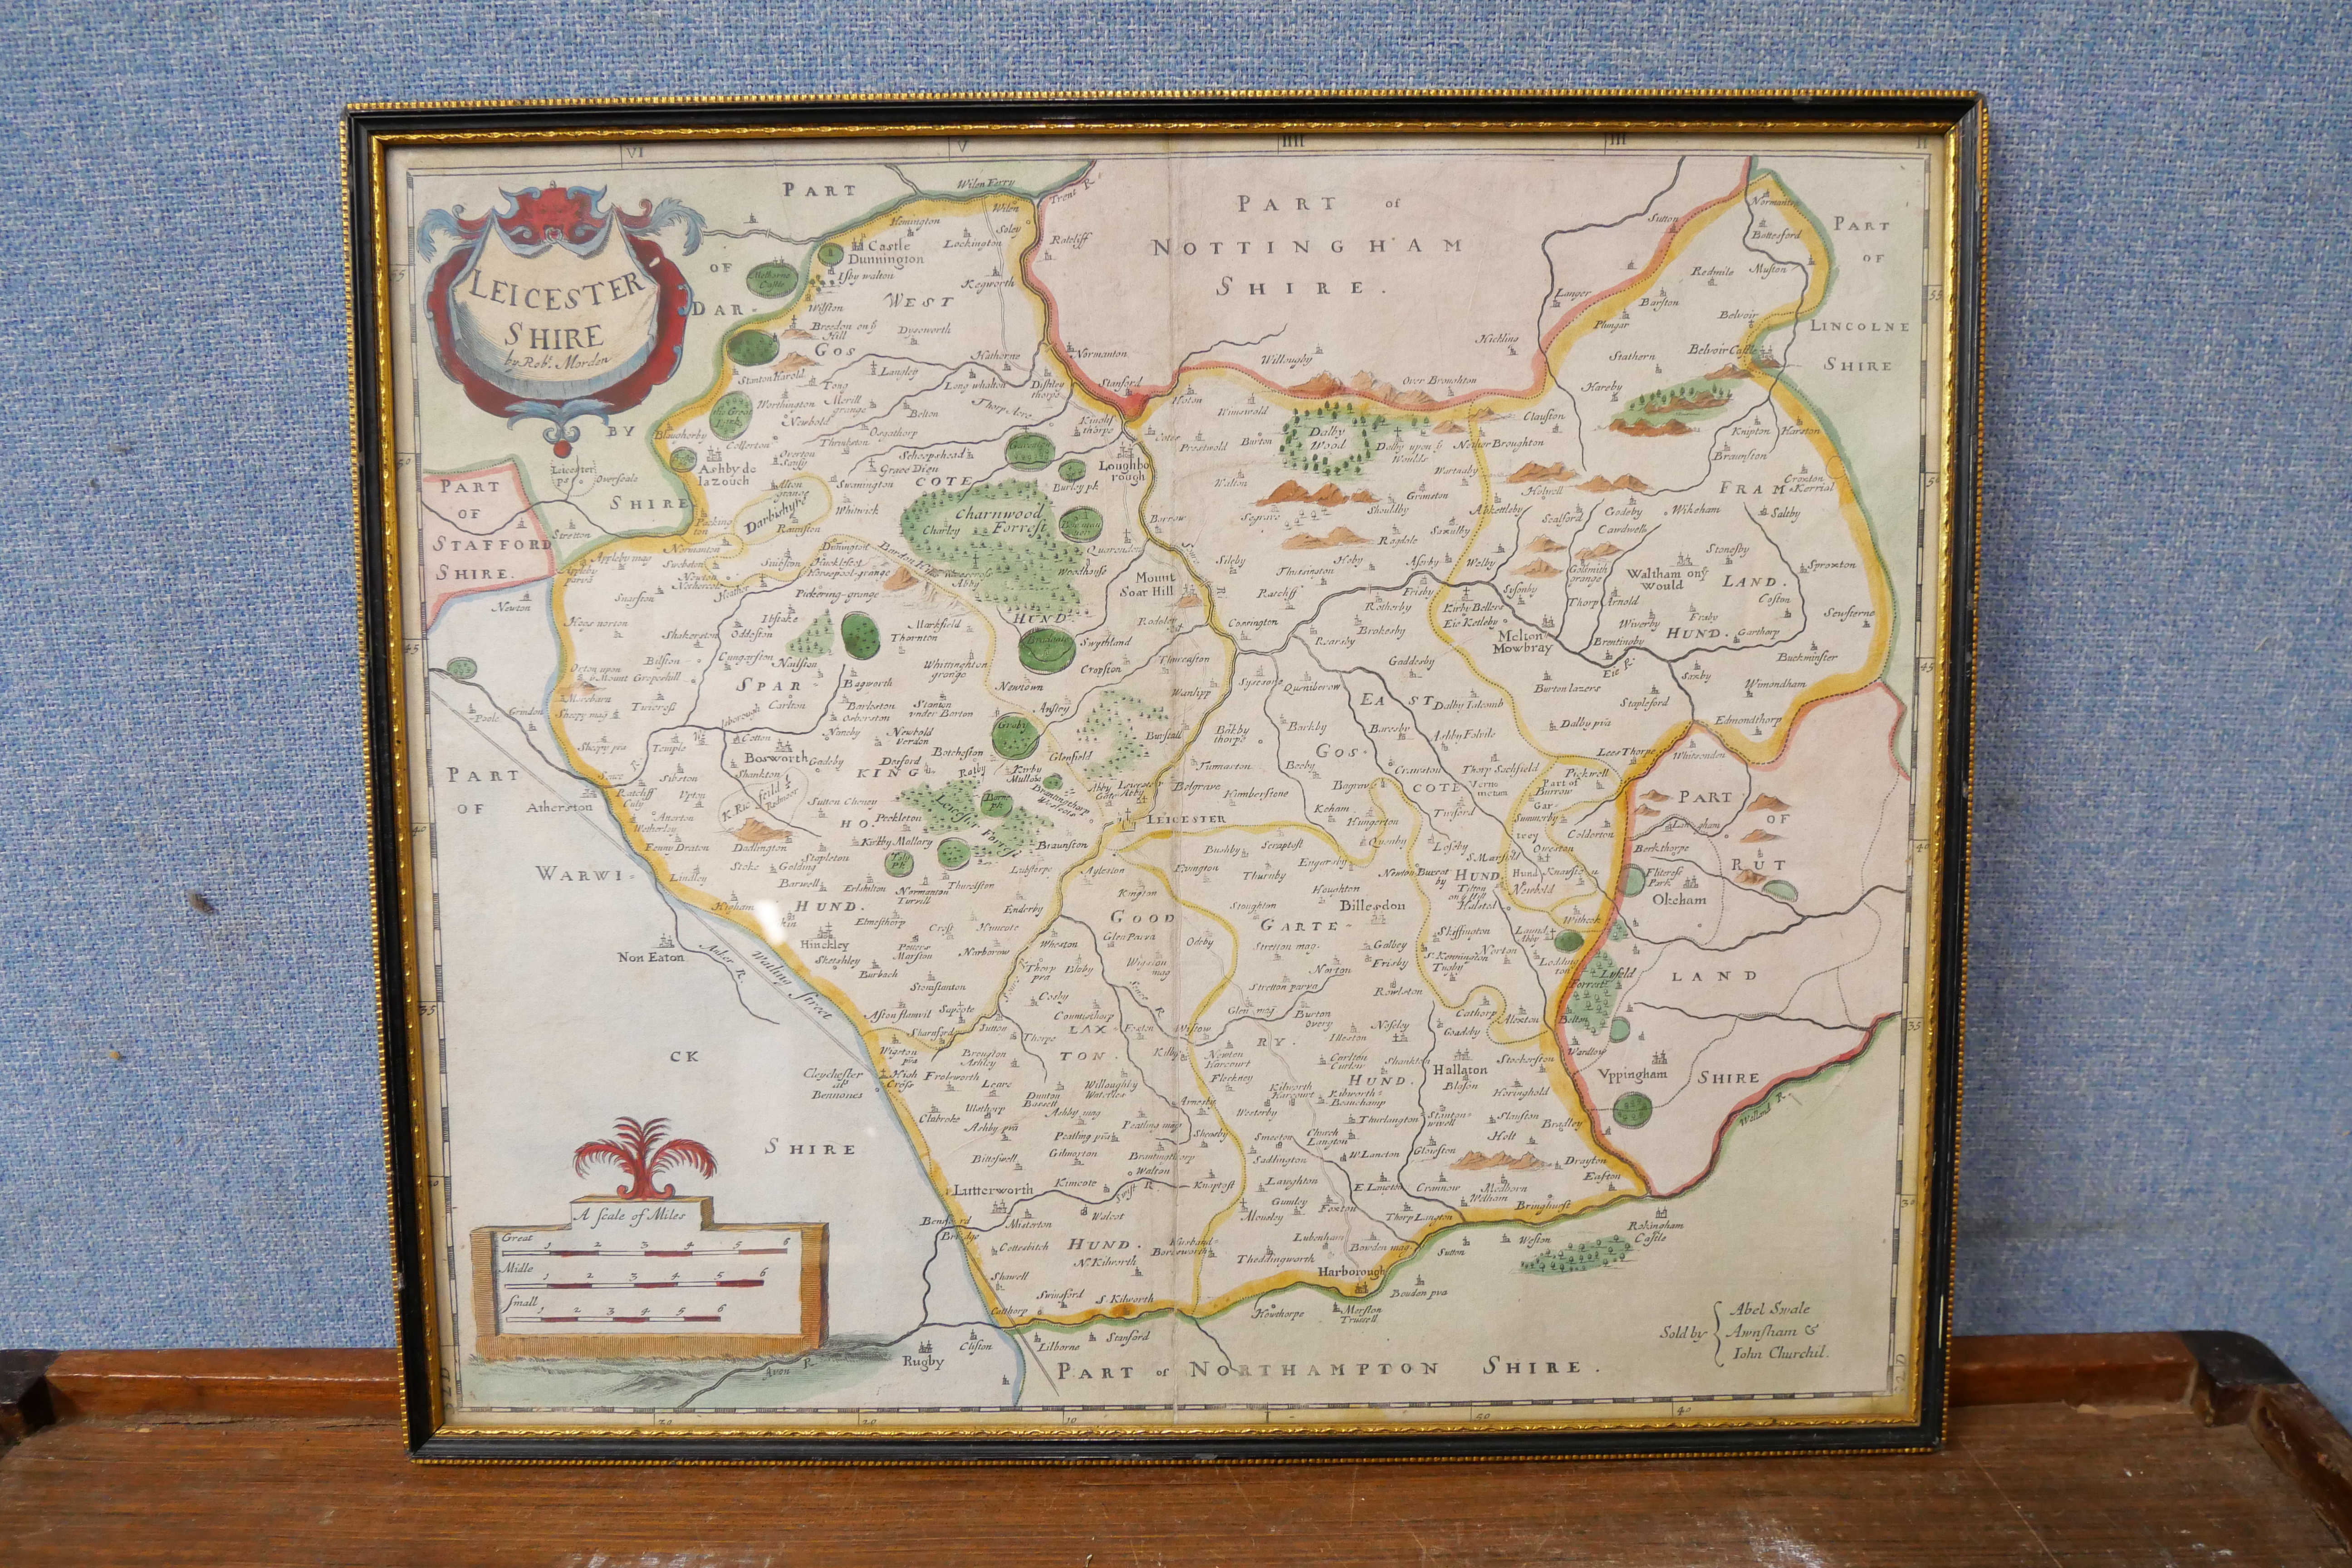 A 17th Century John Morden engraved map, Leicestershire, framed